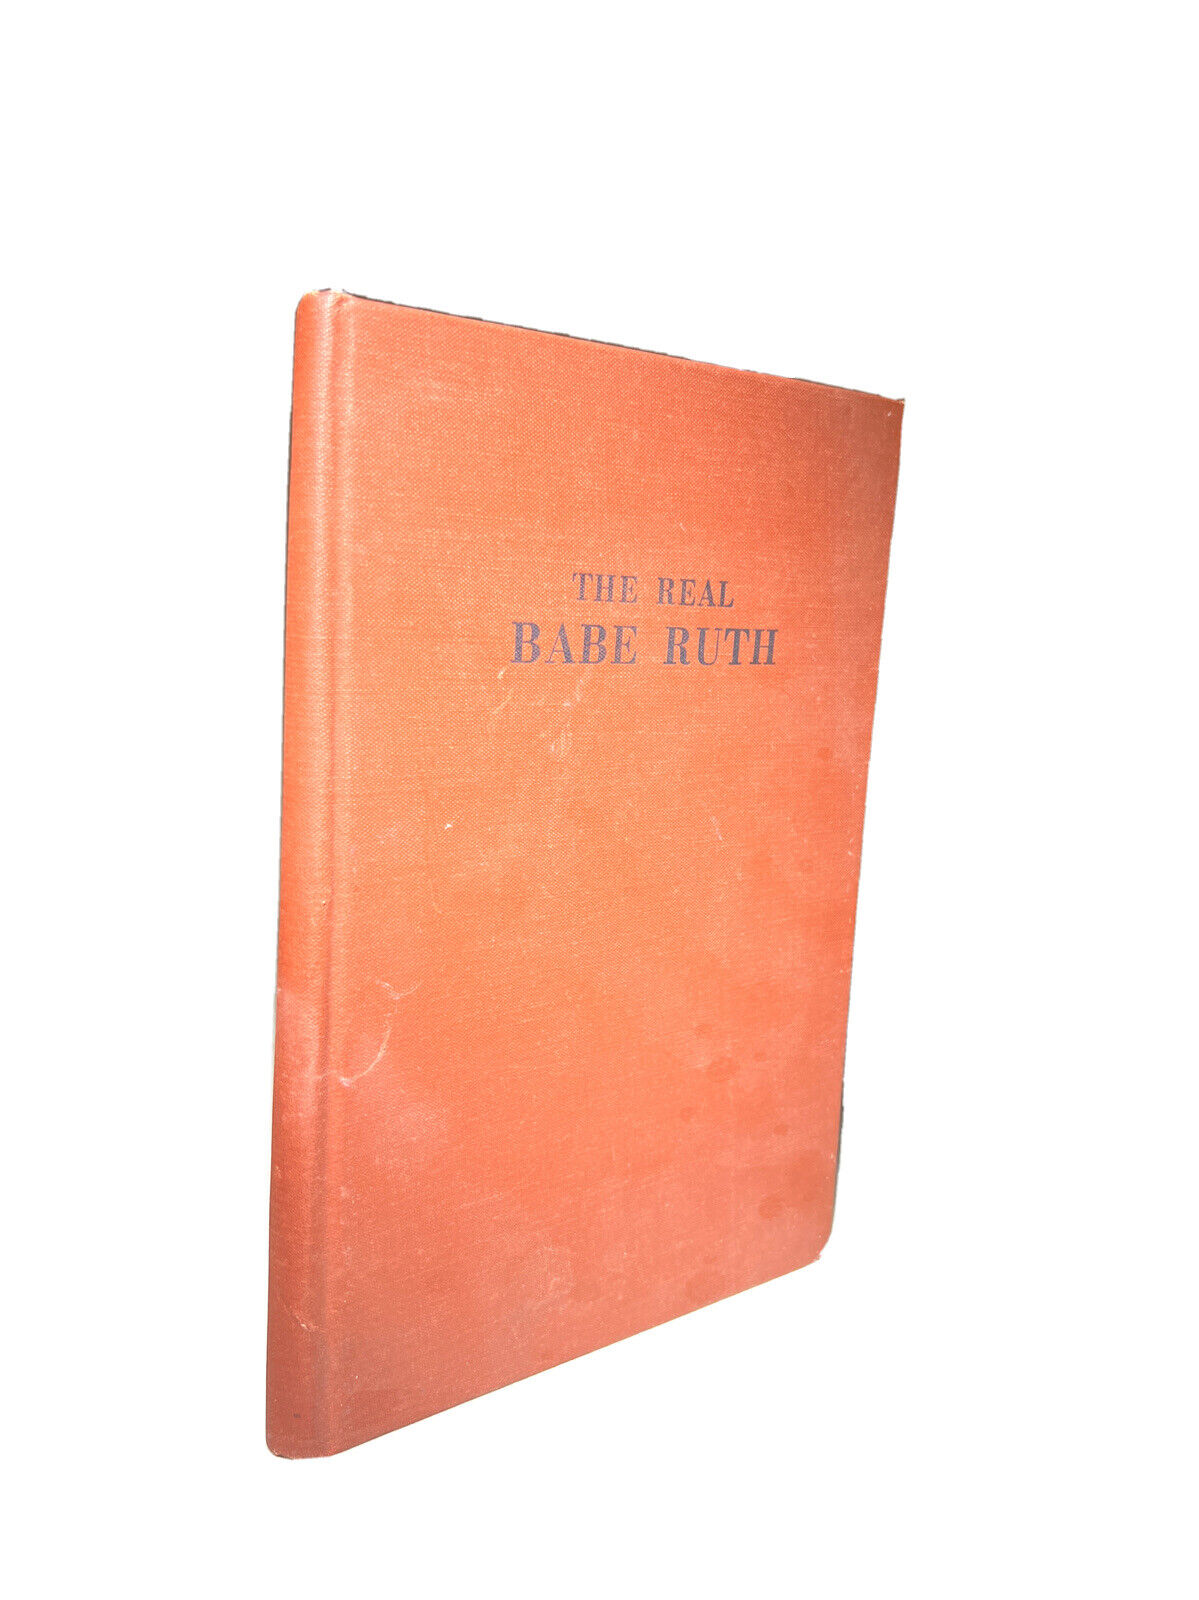 The Real Babe Ruth By Dan Daniel 1948 Hardcover C. C. Spink & Son